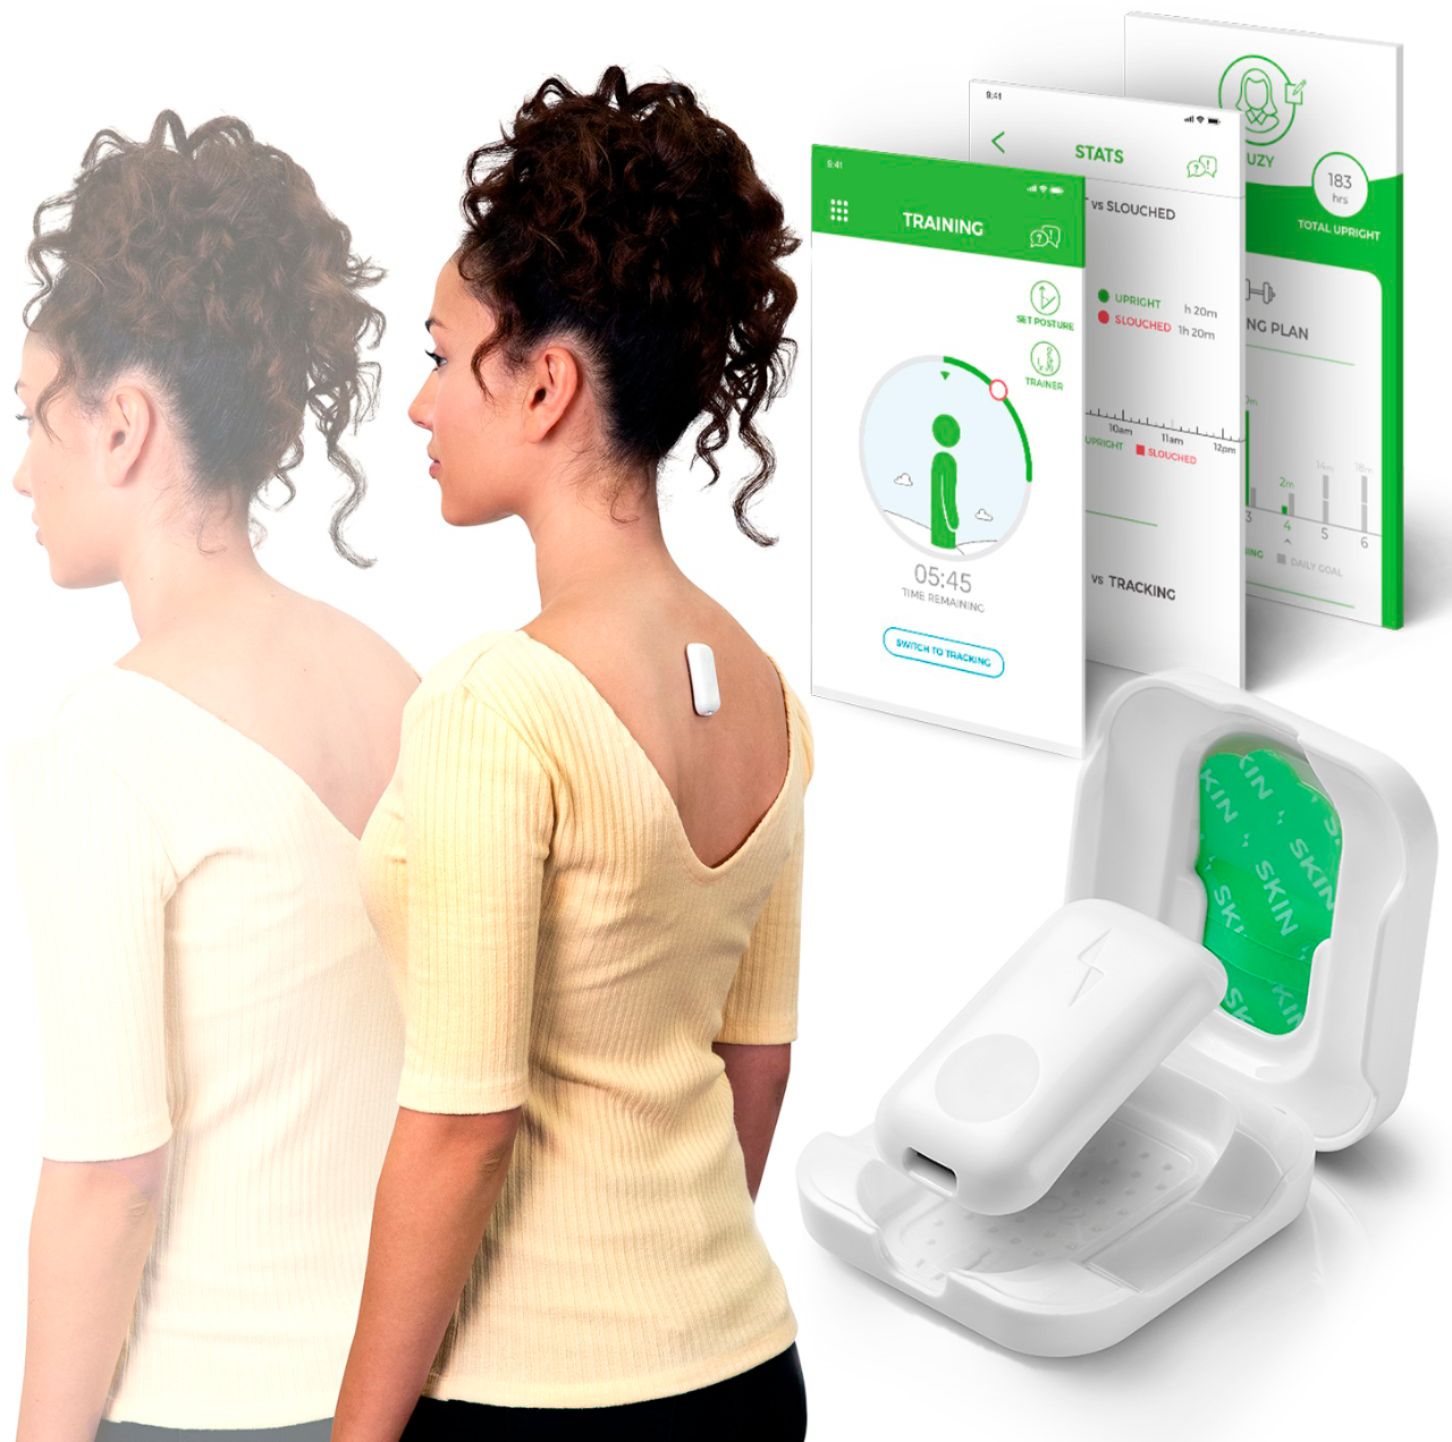 4 Wellness Gadgets You Need in Your Office - UPRIGHT Posture Training Device